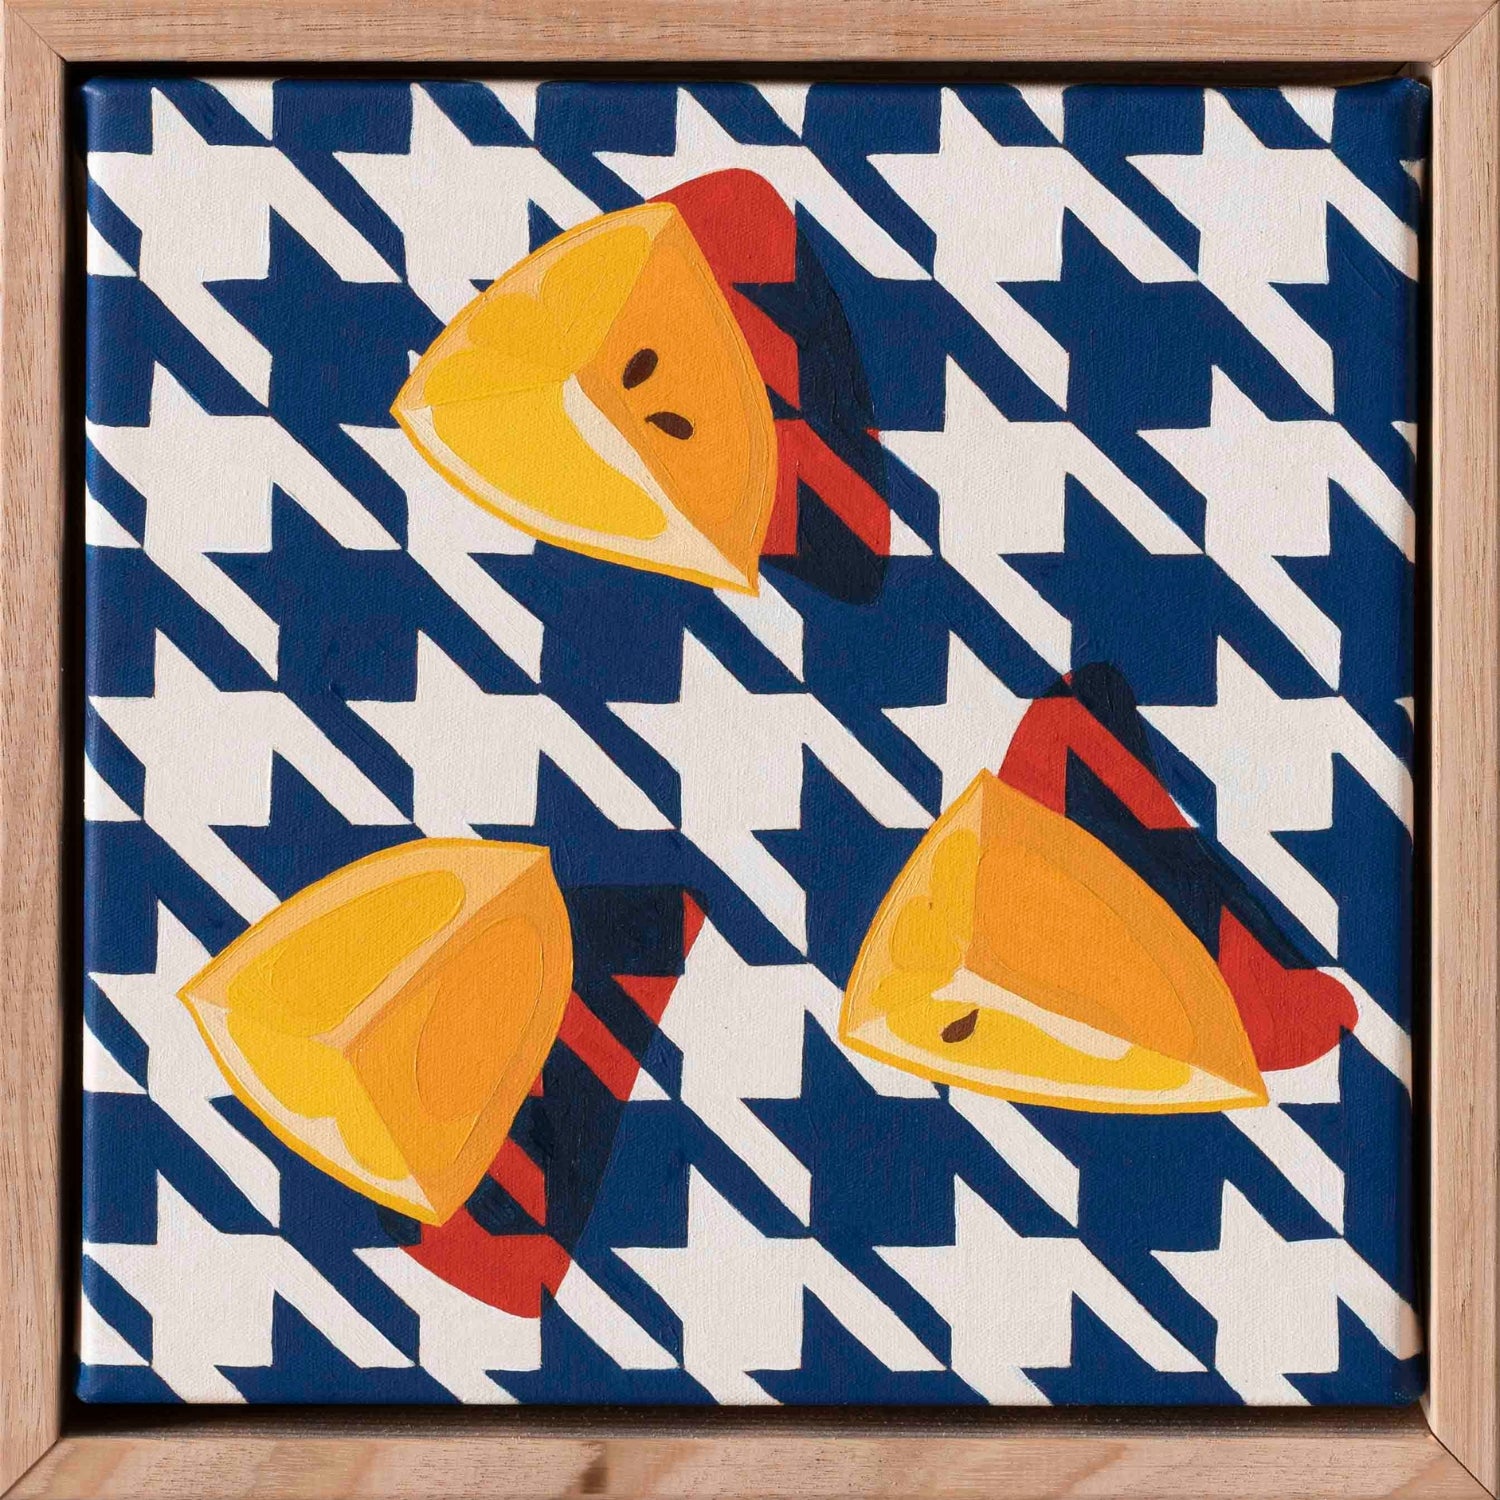 an original oil painting of three wedges of yellow lemons on a navy blue and white houndstooth background with strong red shadows framed in a wood timber shadow box